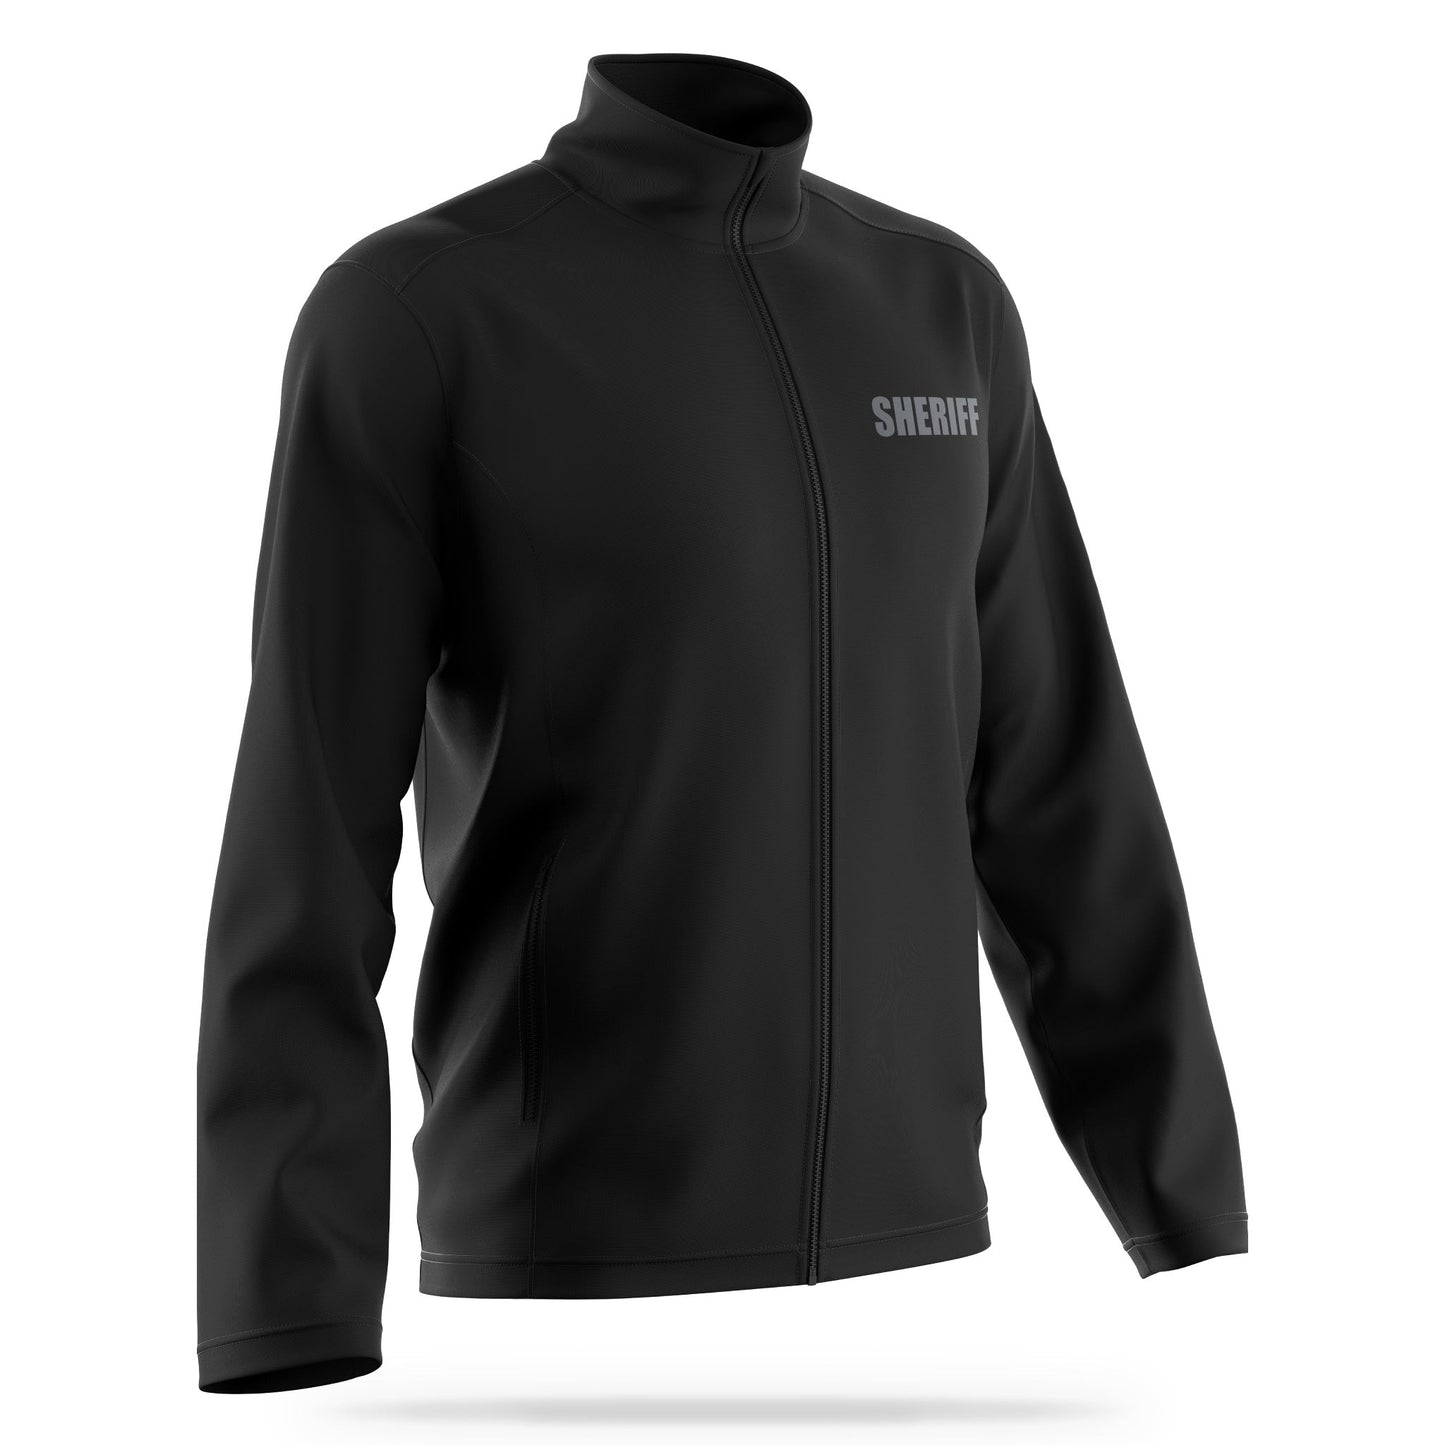 [SHERIFF] Soft Shell Jacket [BLK/GRY]-13 Fifty Apparel